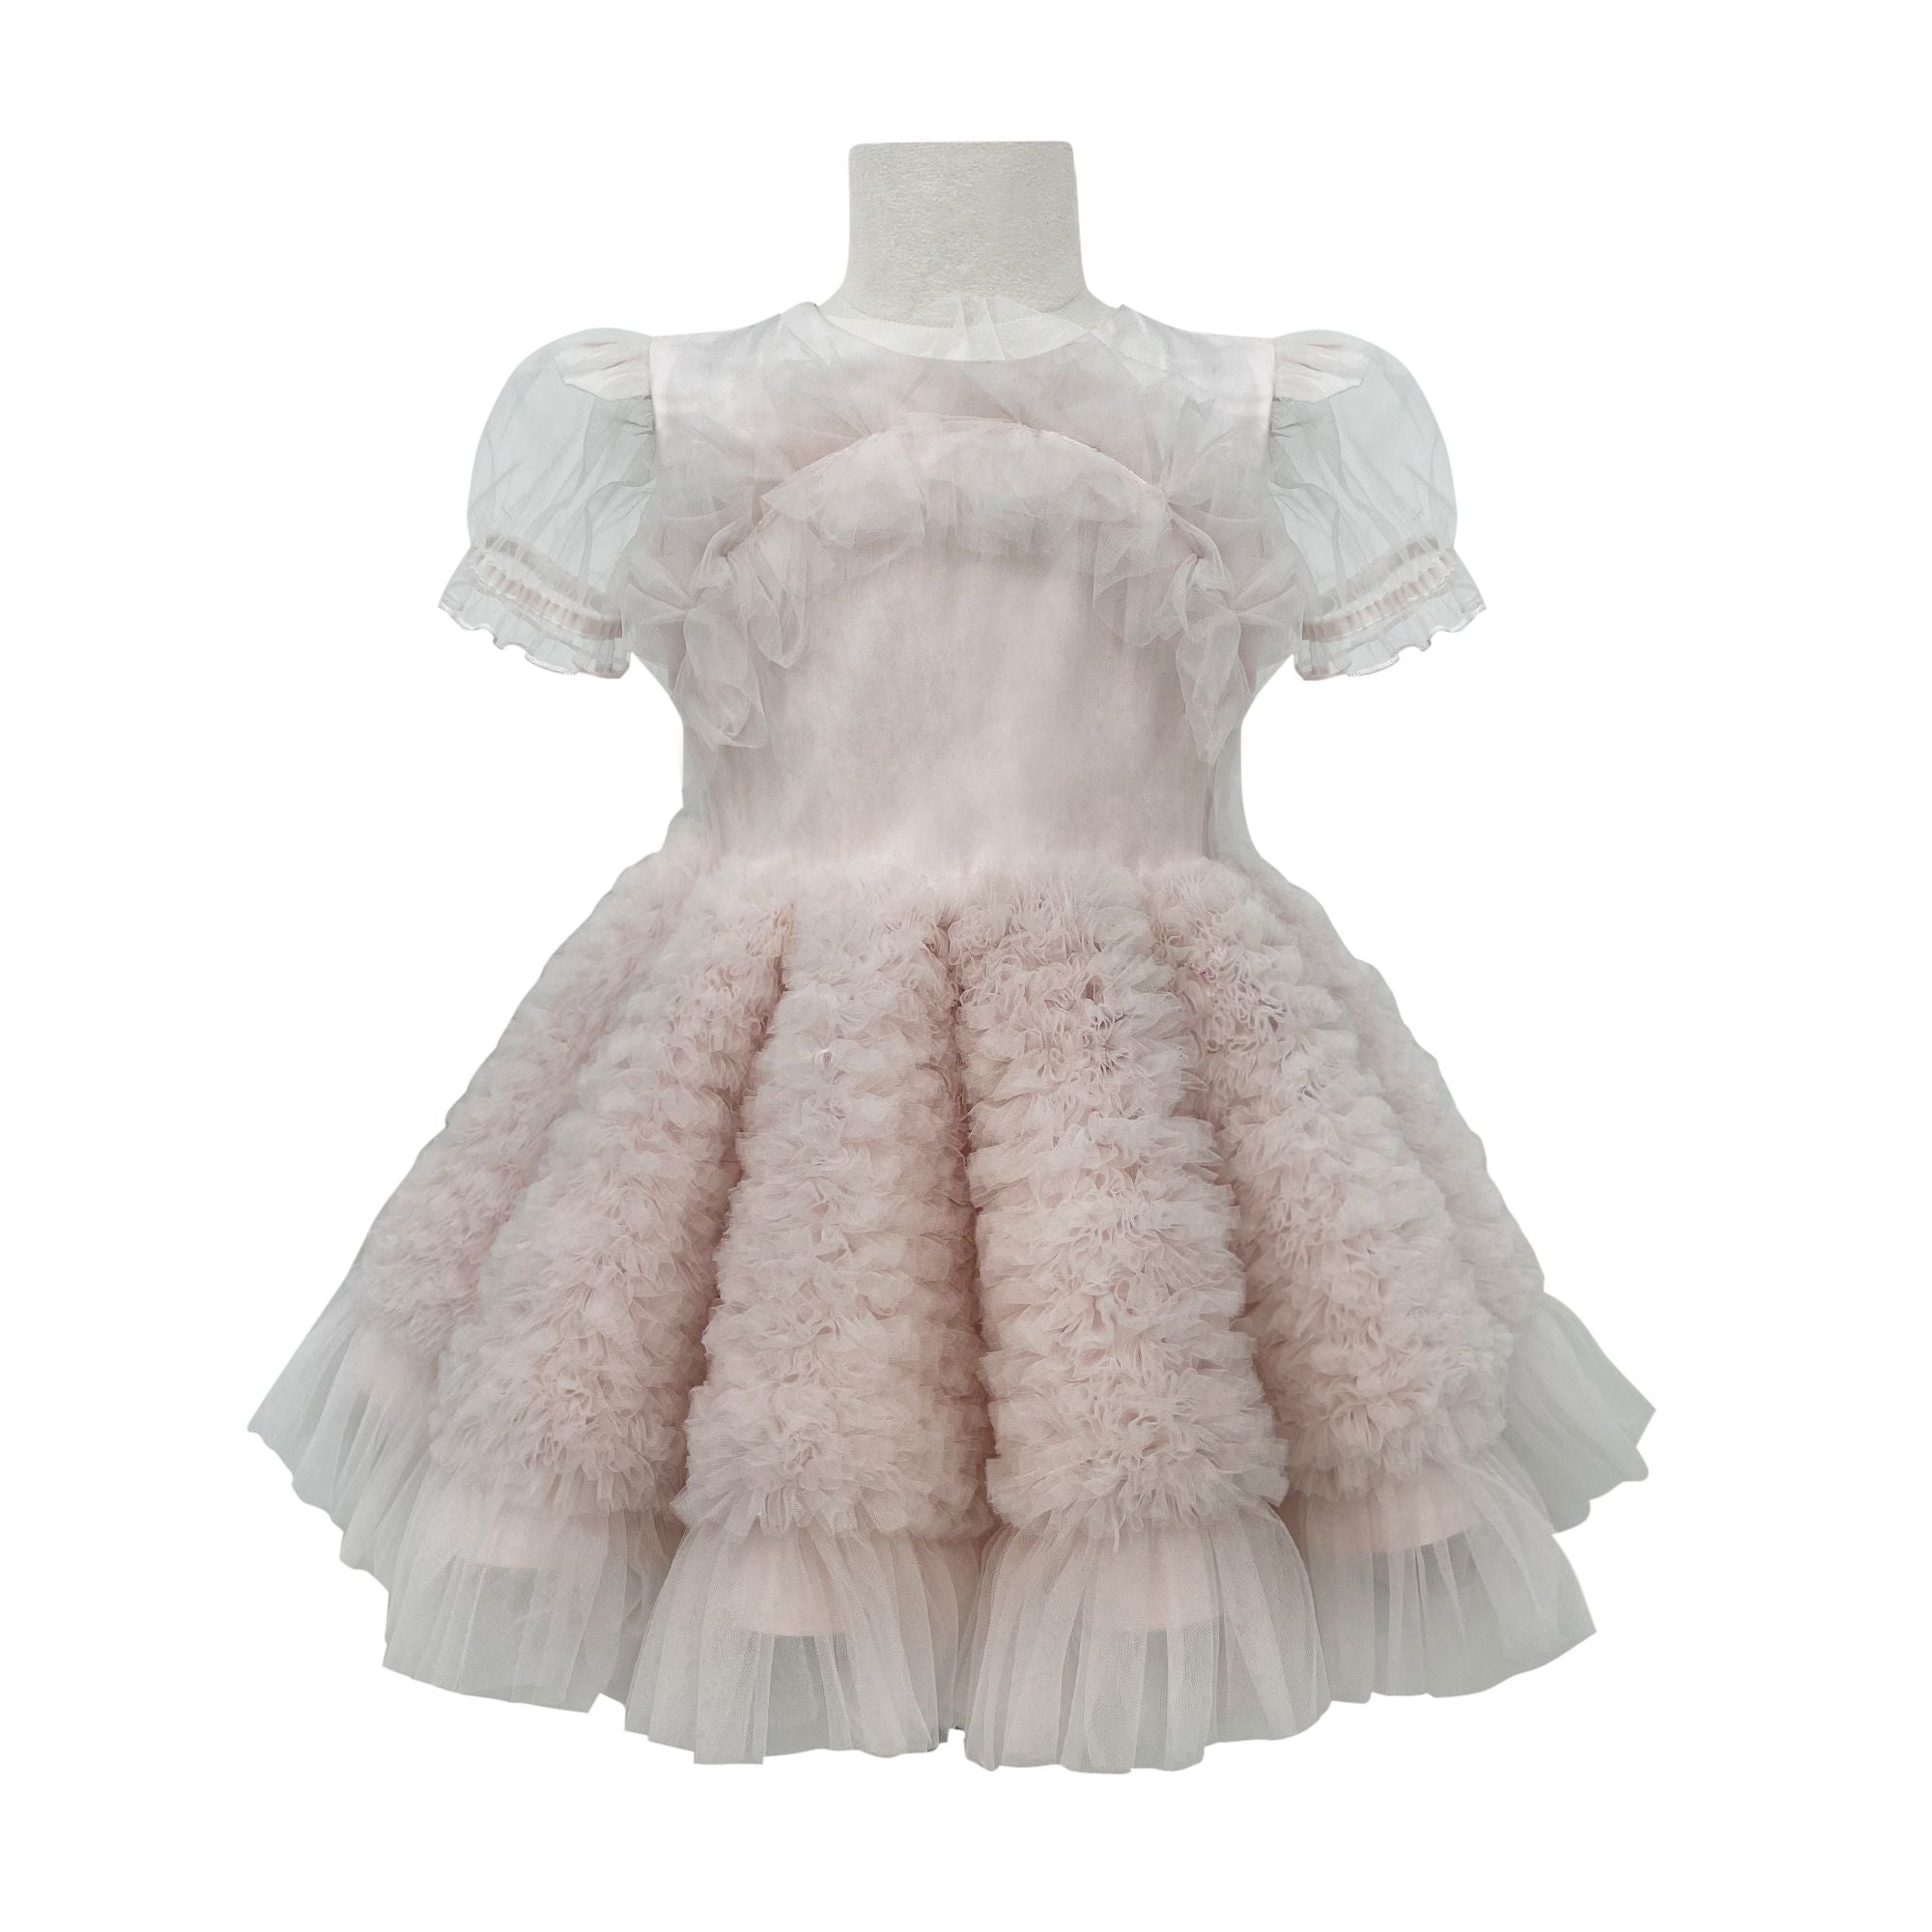 The Ariel Tulle Dress With Sleeves